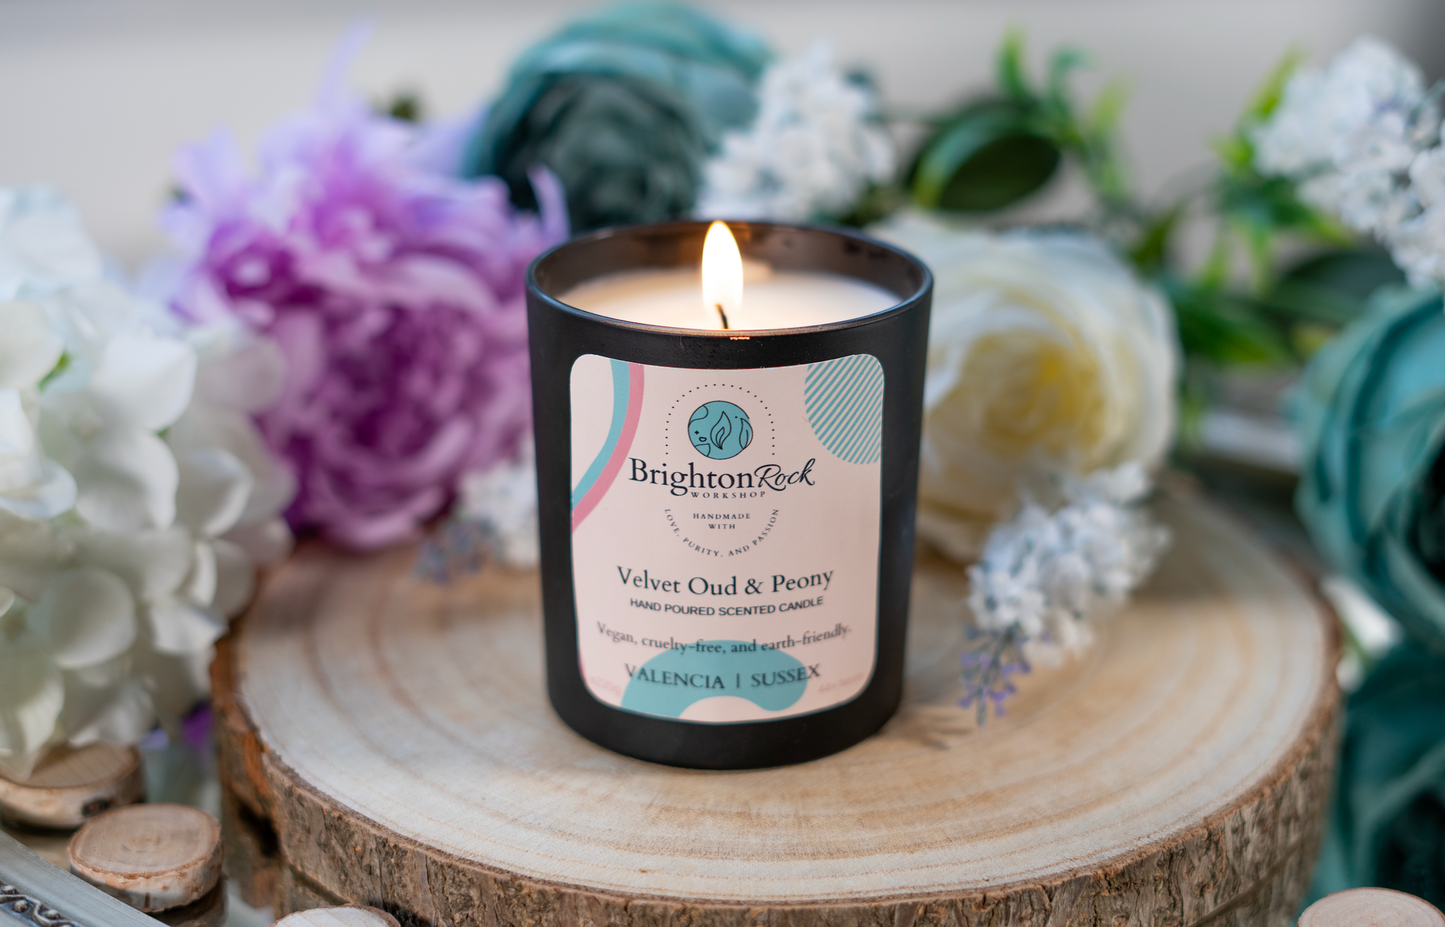 velvet oud & peony Brighton Rock Workshop independent brand scented candle in 220g black Italian glass jar. Strongly scented home fragrance, made in Alicante, Spain. Ships to Europe and the UK. Eco-friendly packaging, vegan & cruelty-free